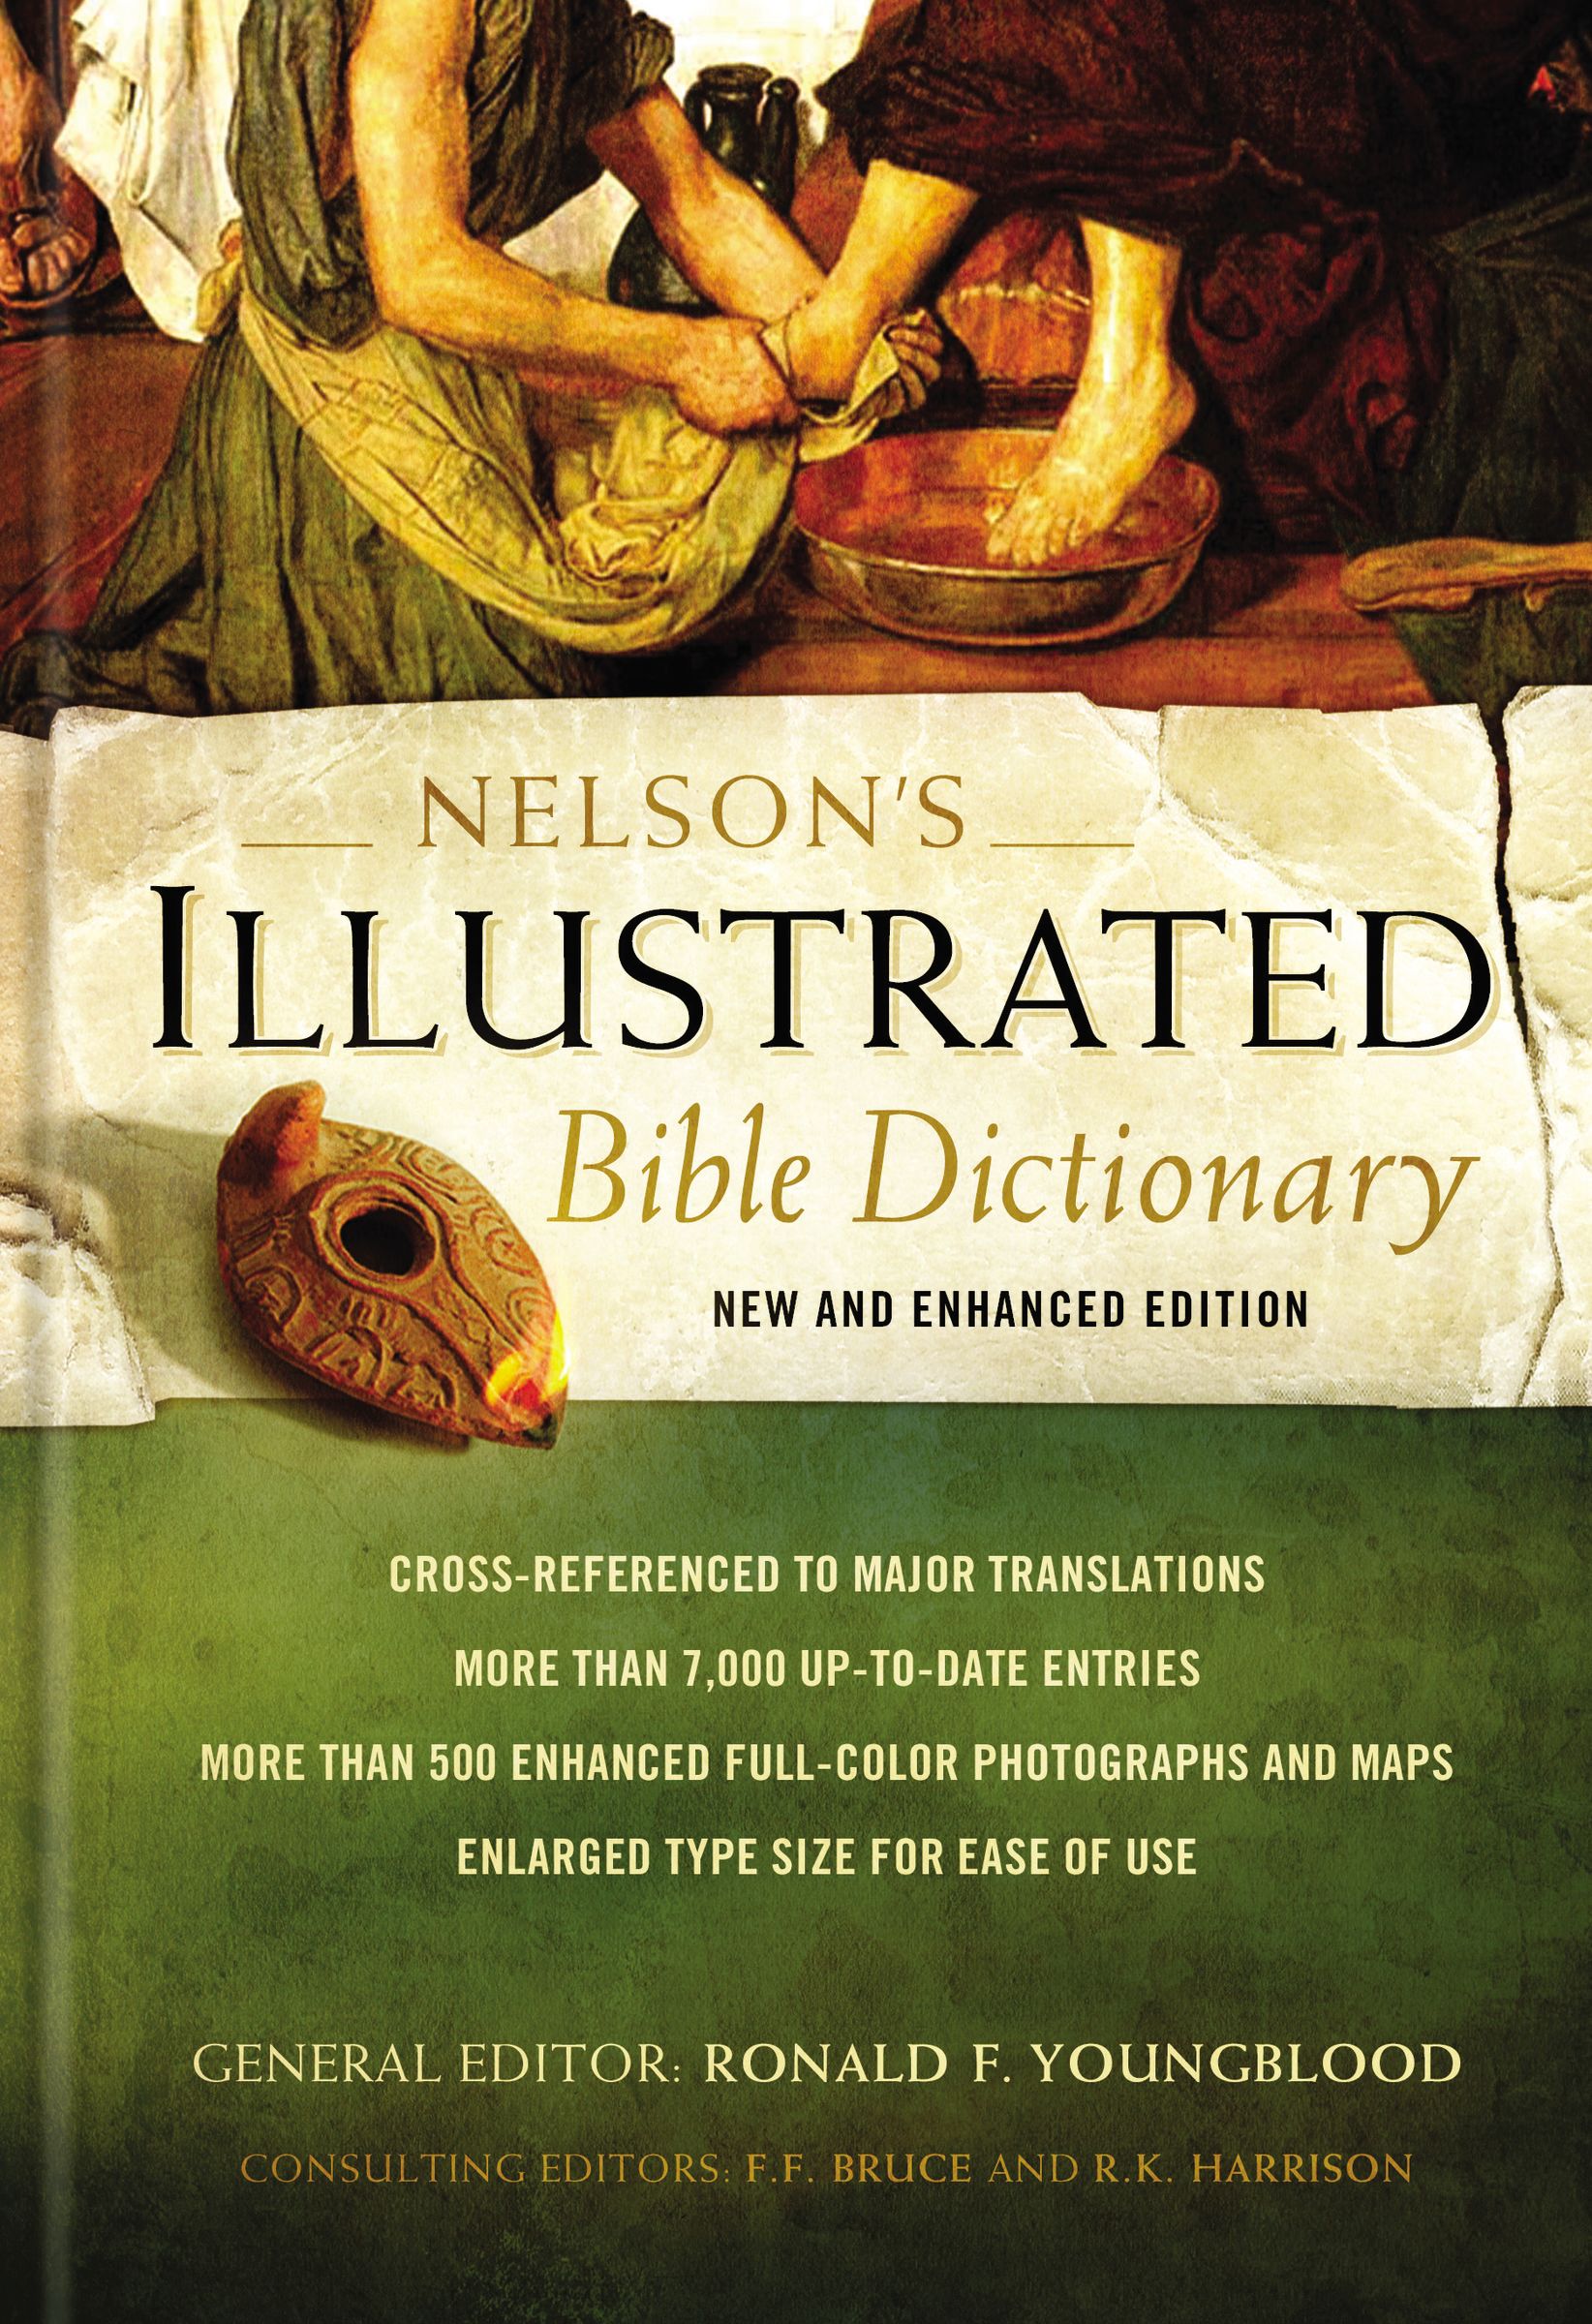 nelsons illustrated bible dictionary download